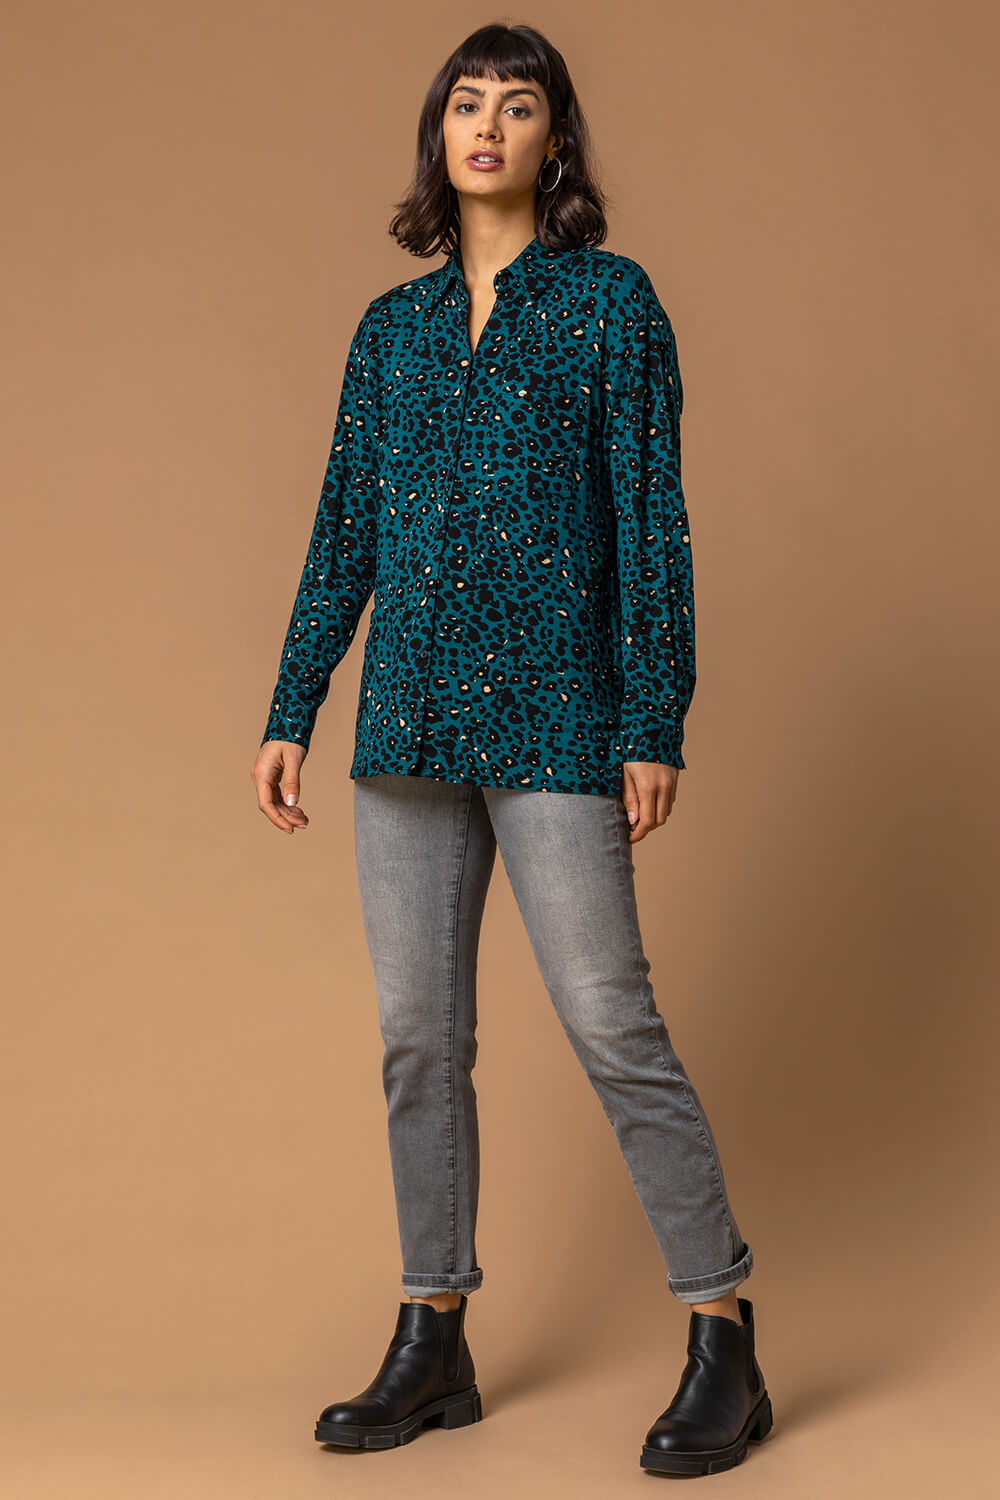 Teal Animal Print Jersey Buttoned Shirt, Image 3 of 4